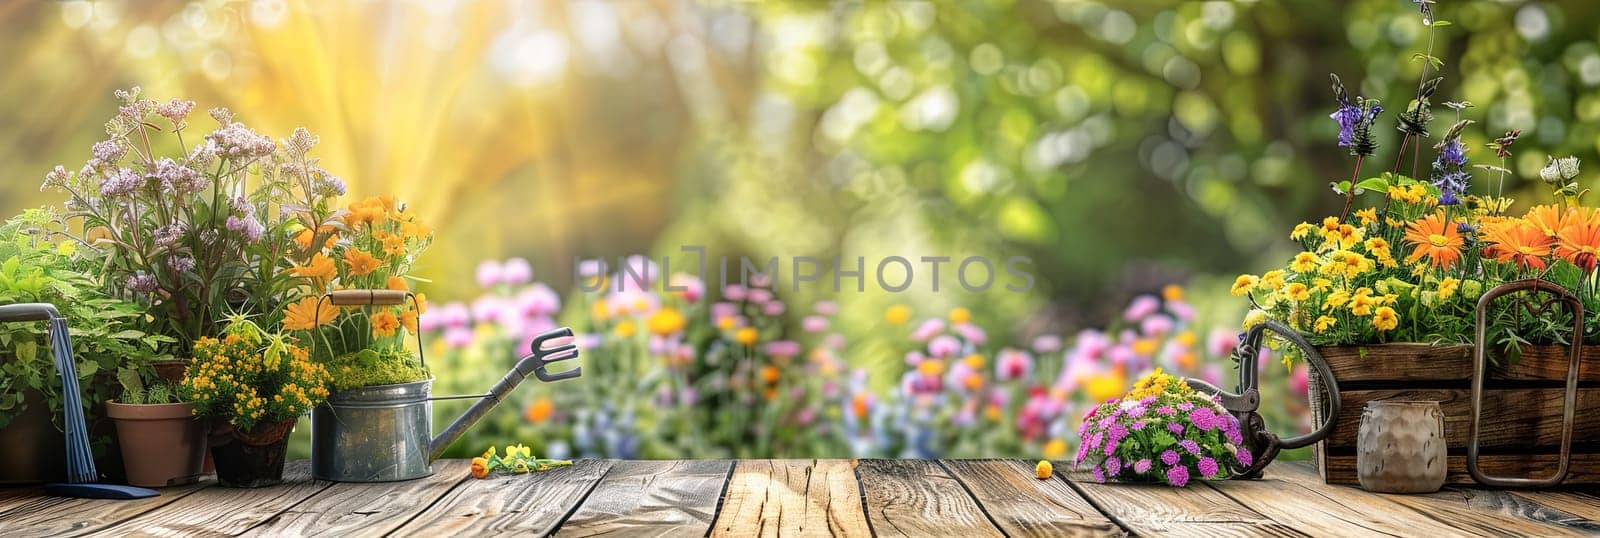 Abundance of colorful flowers and garden tools scattered on a wooden table with a blurred outdoor background.